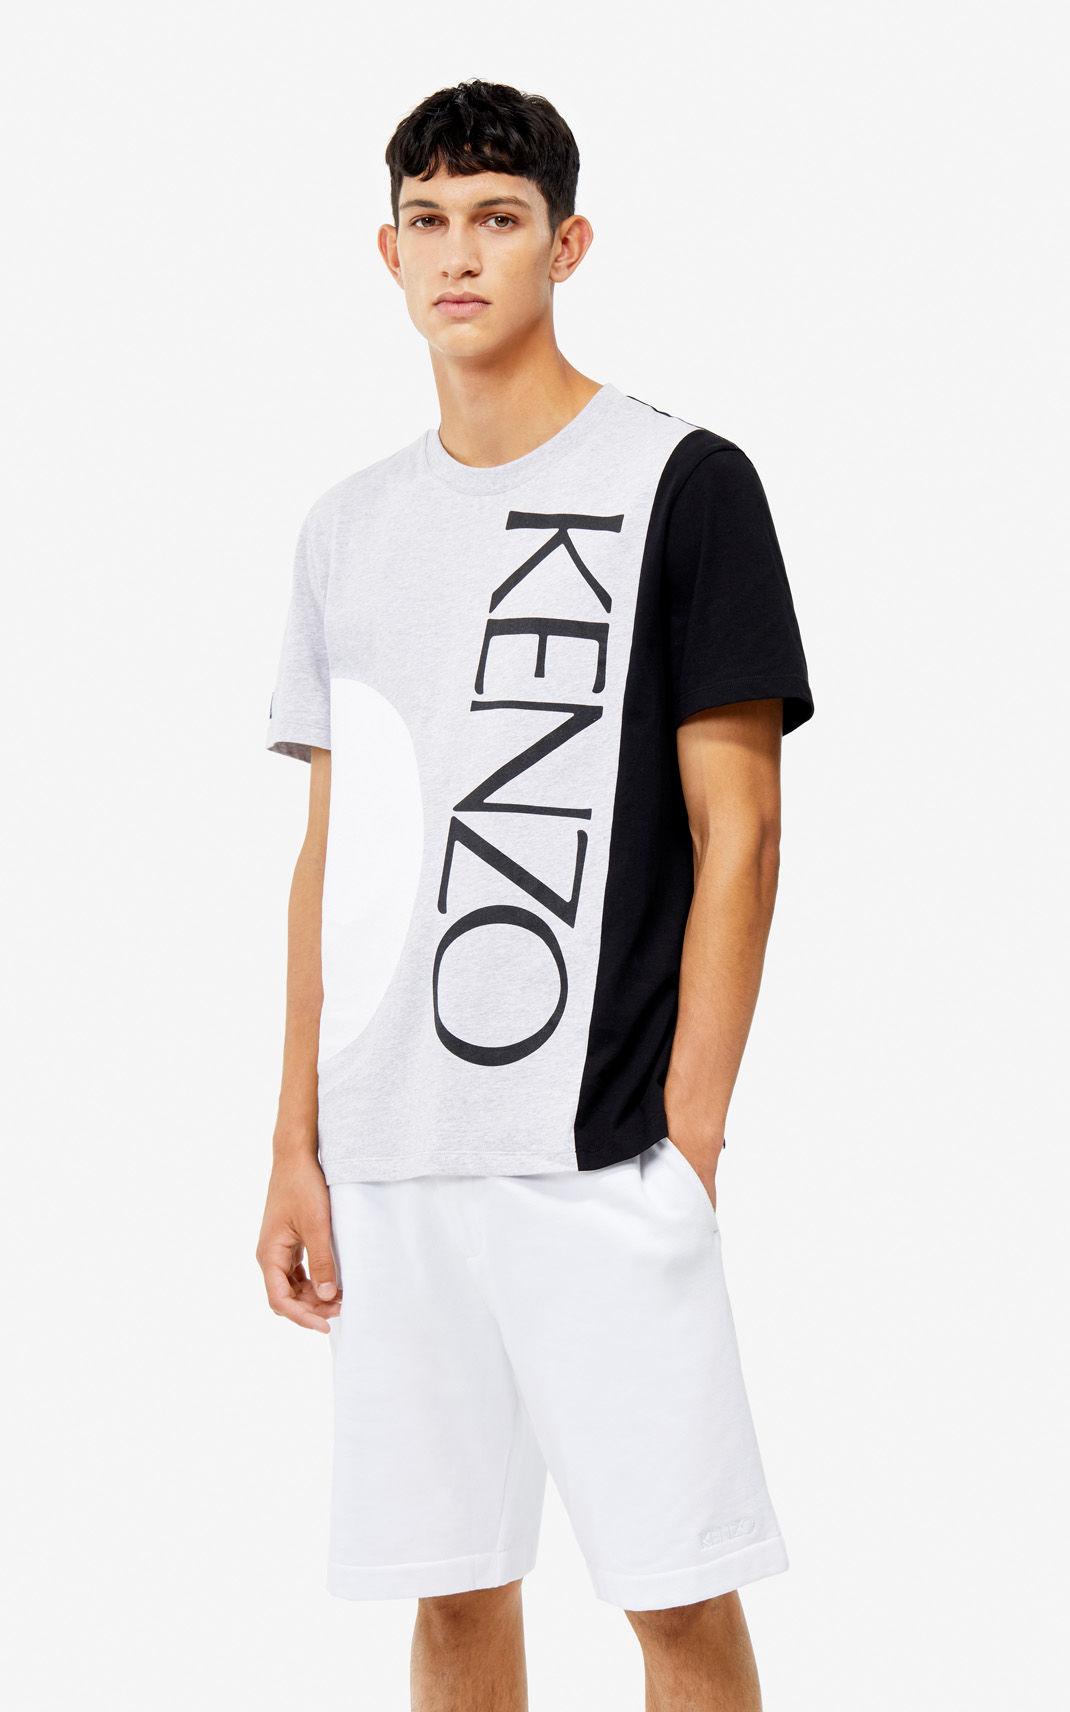 KENZO Dual-fabric Shorts in White for Men - Lyst